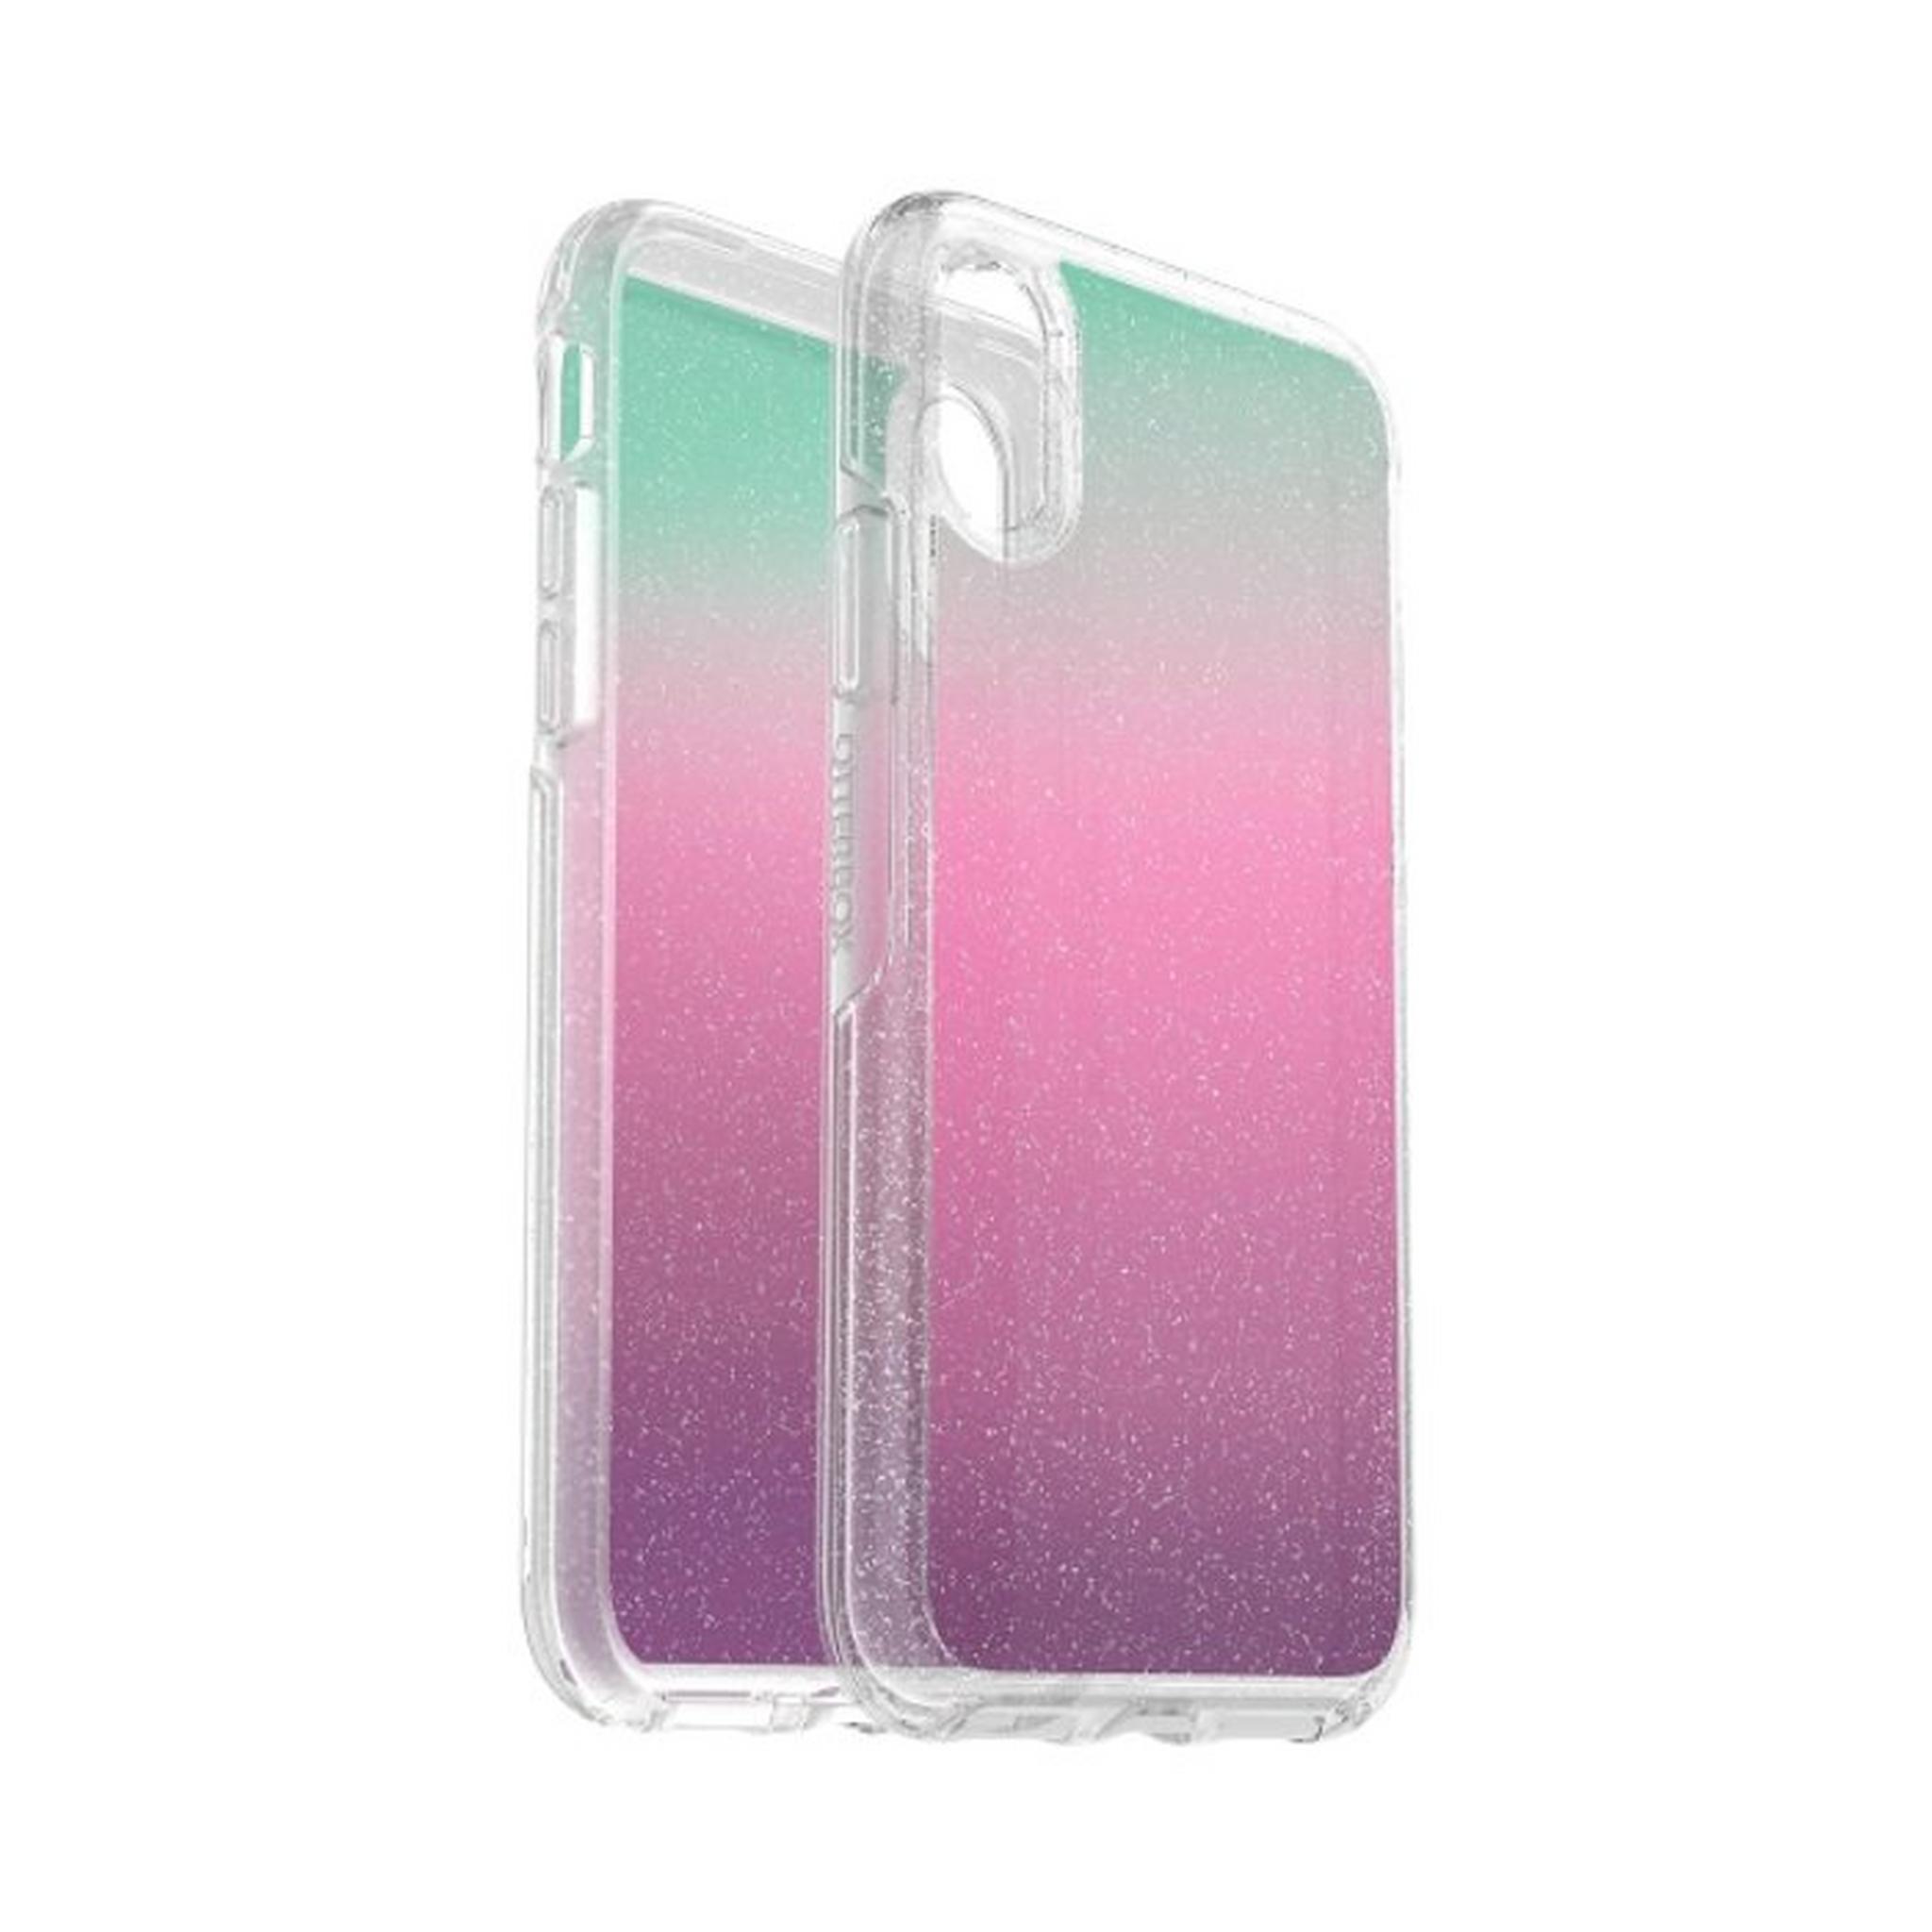 Otterbox Symmetry iPhone 5.8 inches Back Case (77-59610) - Clear